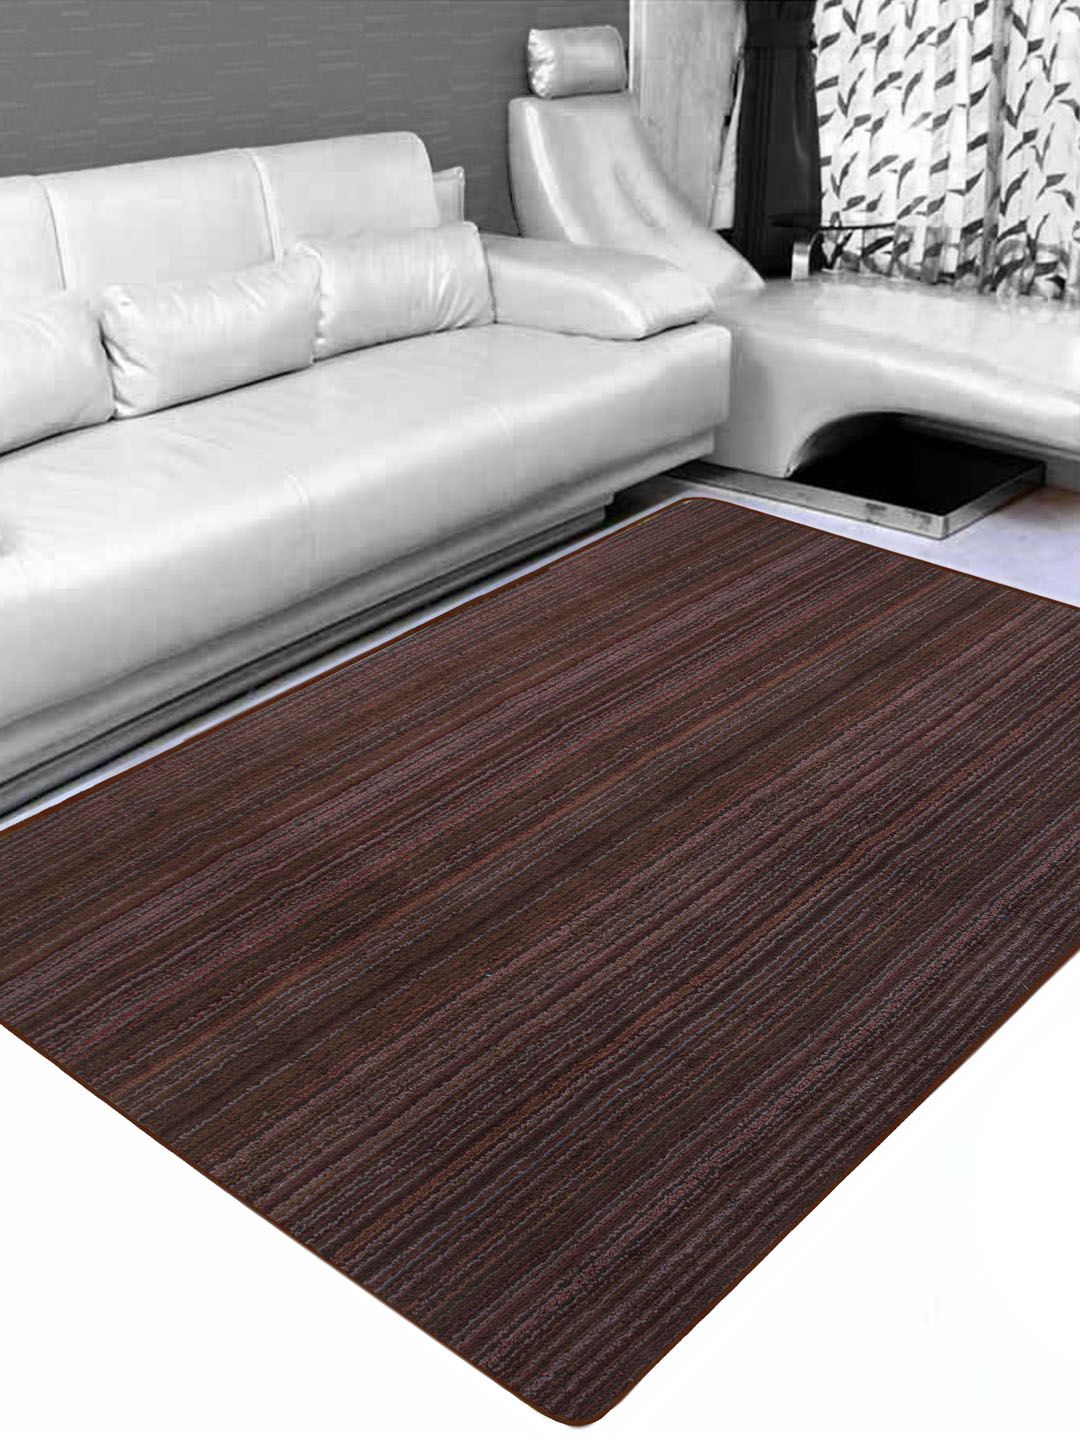 Saral Home Brown Striped Carpet Price in India